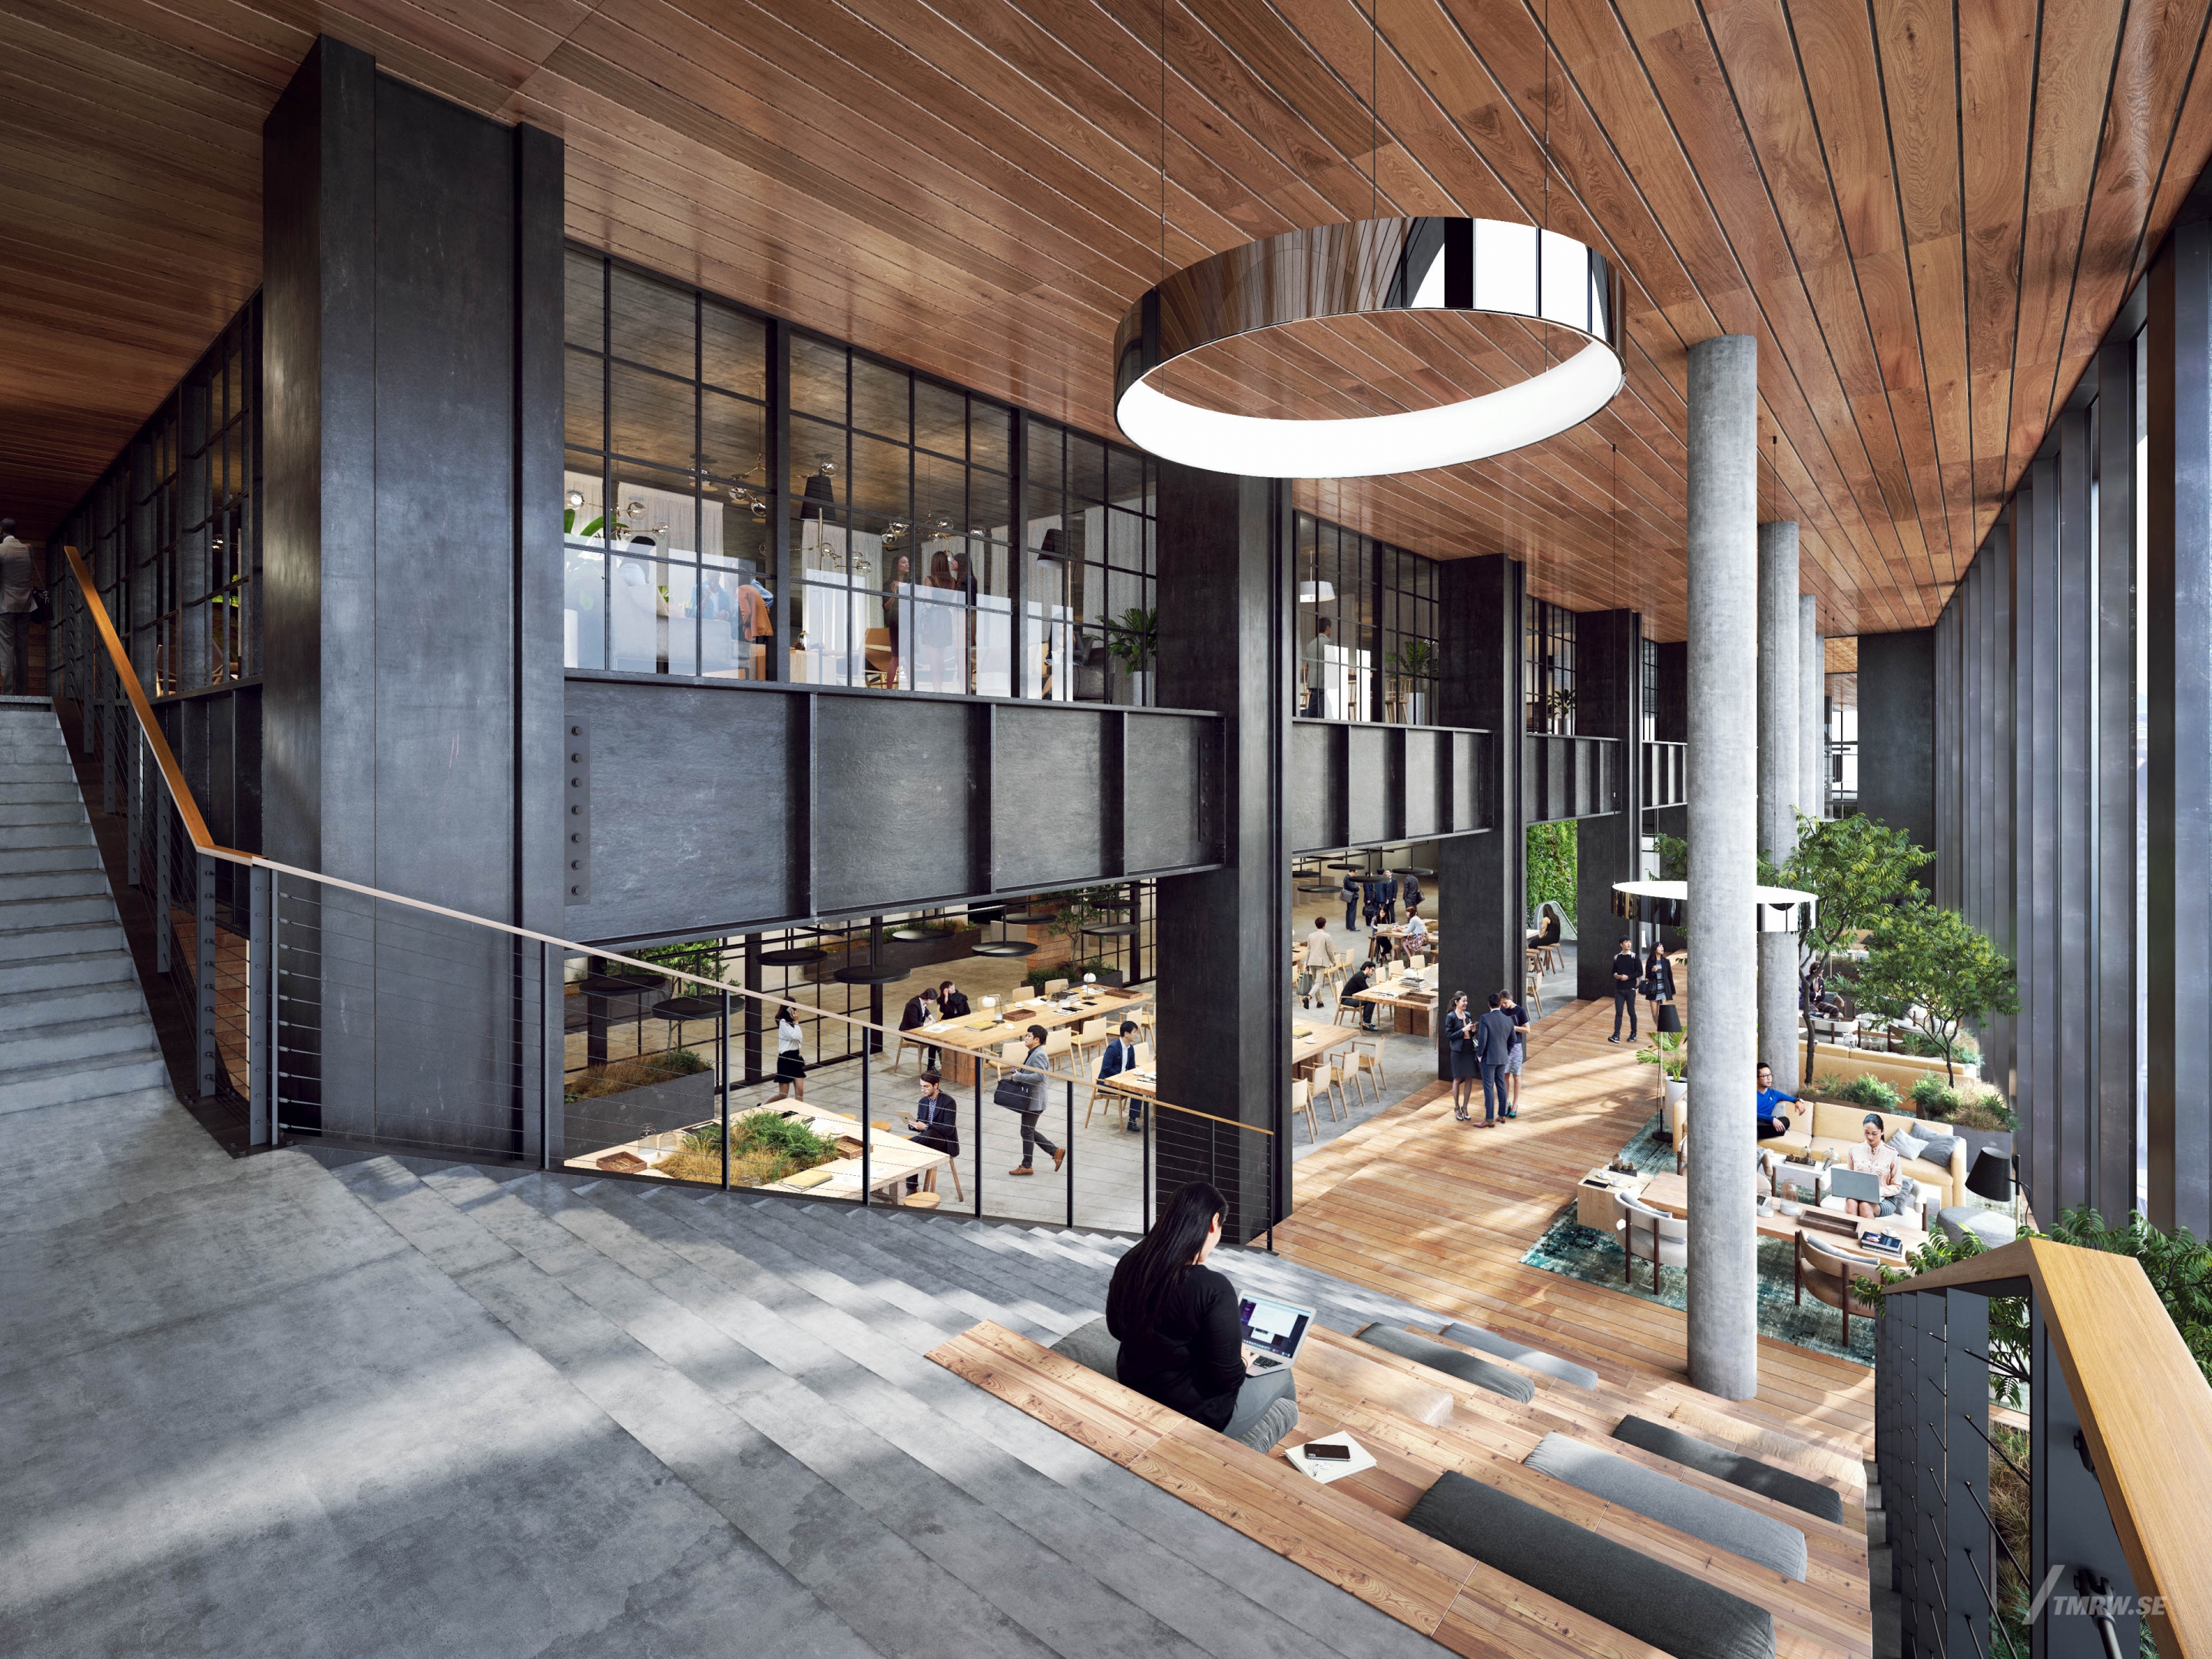 Architectural visualization of Shin Fukuoka for KPF a coworking area, with a person sittning in a stair working, in day light form an interior view.